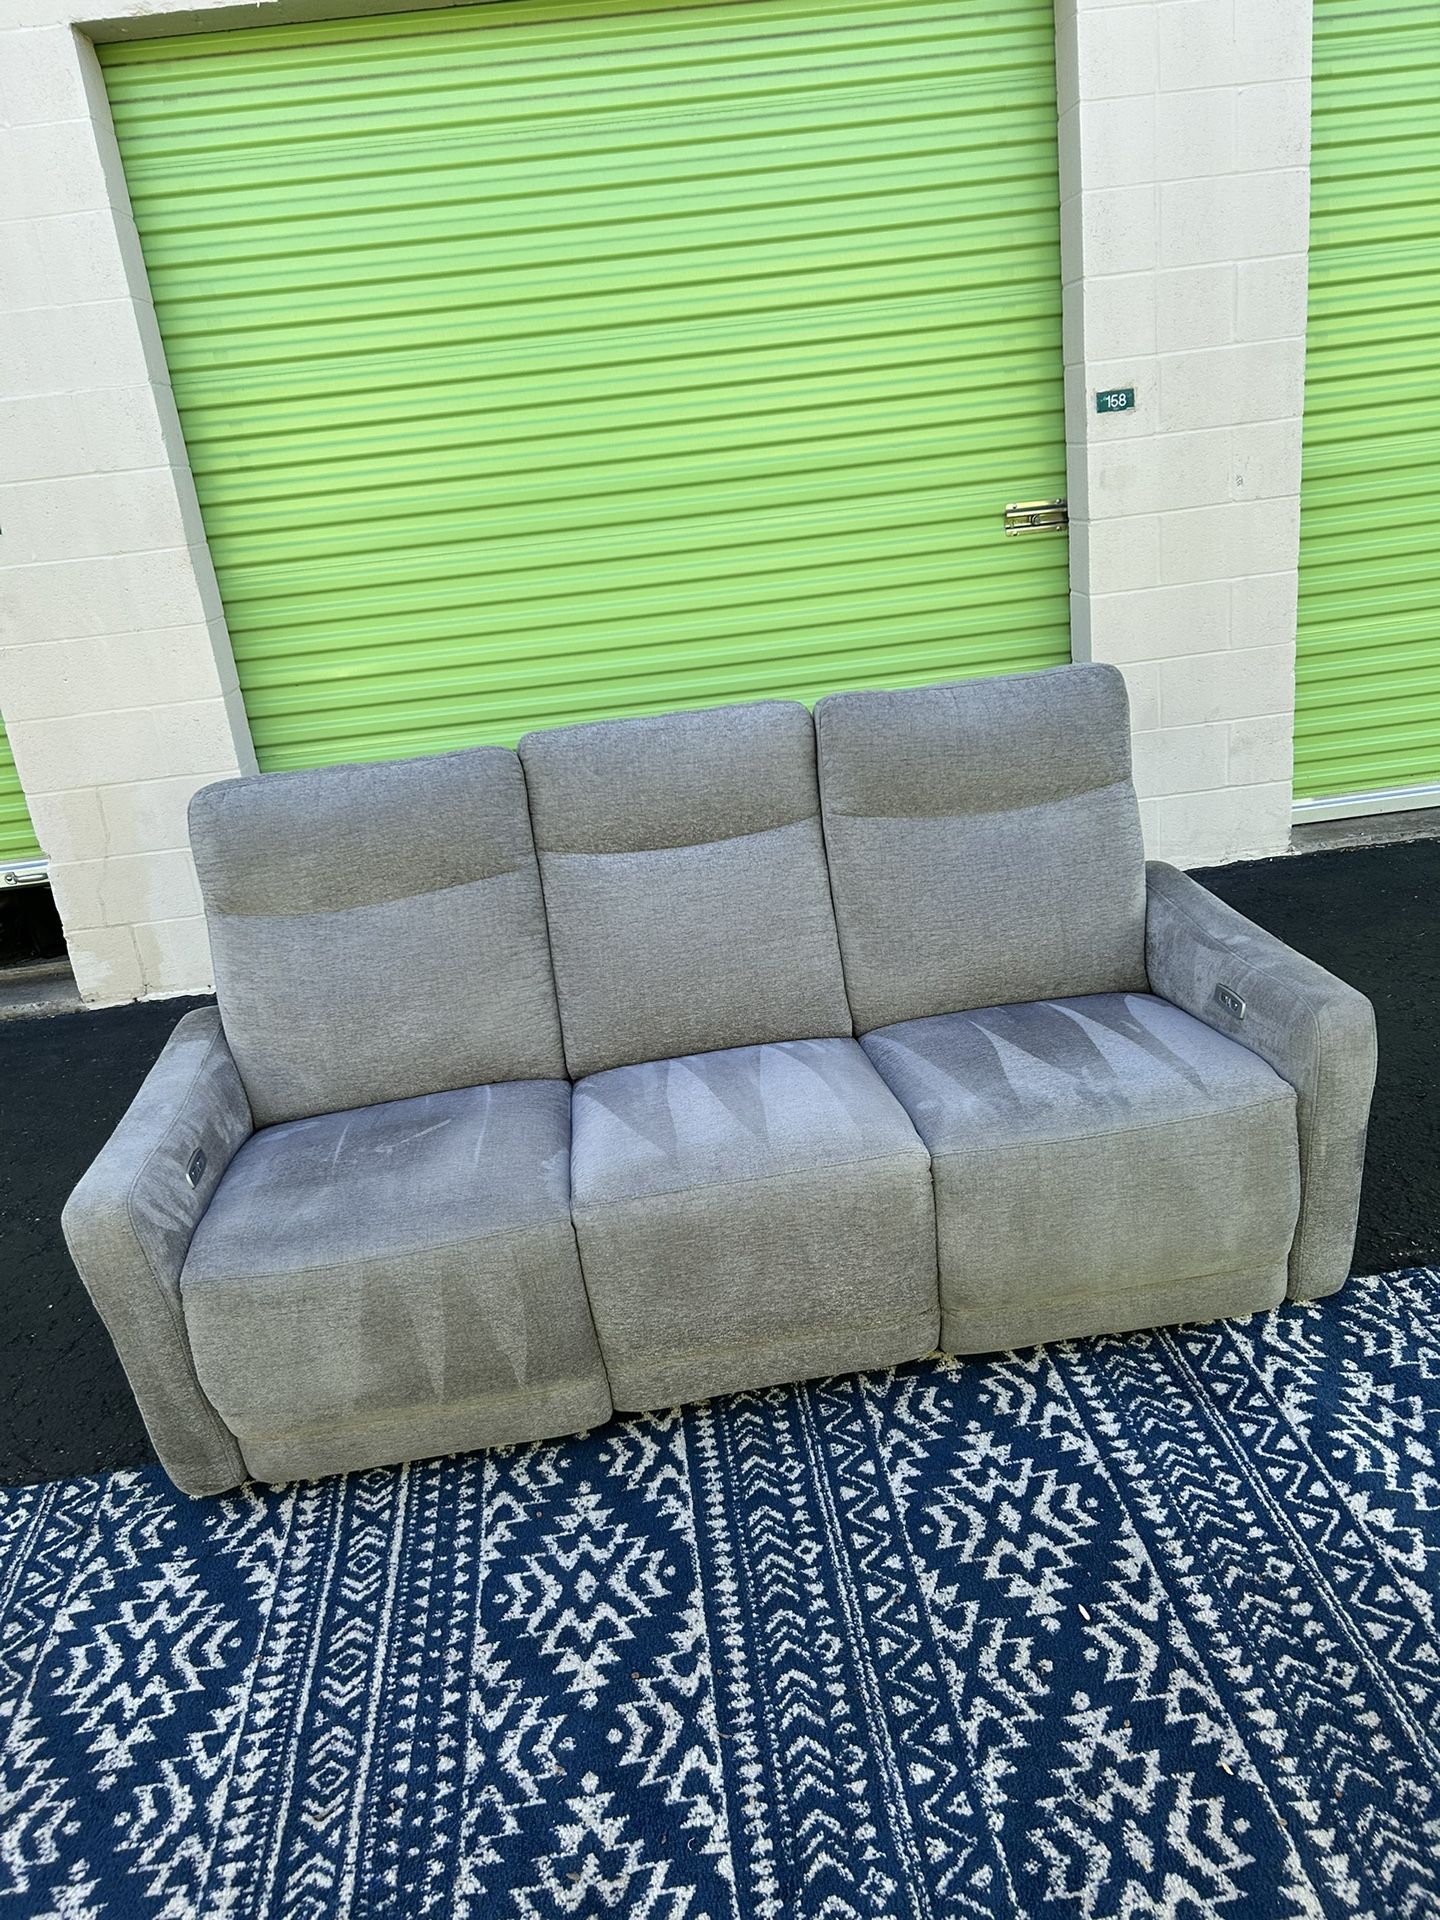 Power Couch, Reclines And Other 🛻Free Delivery🛻